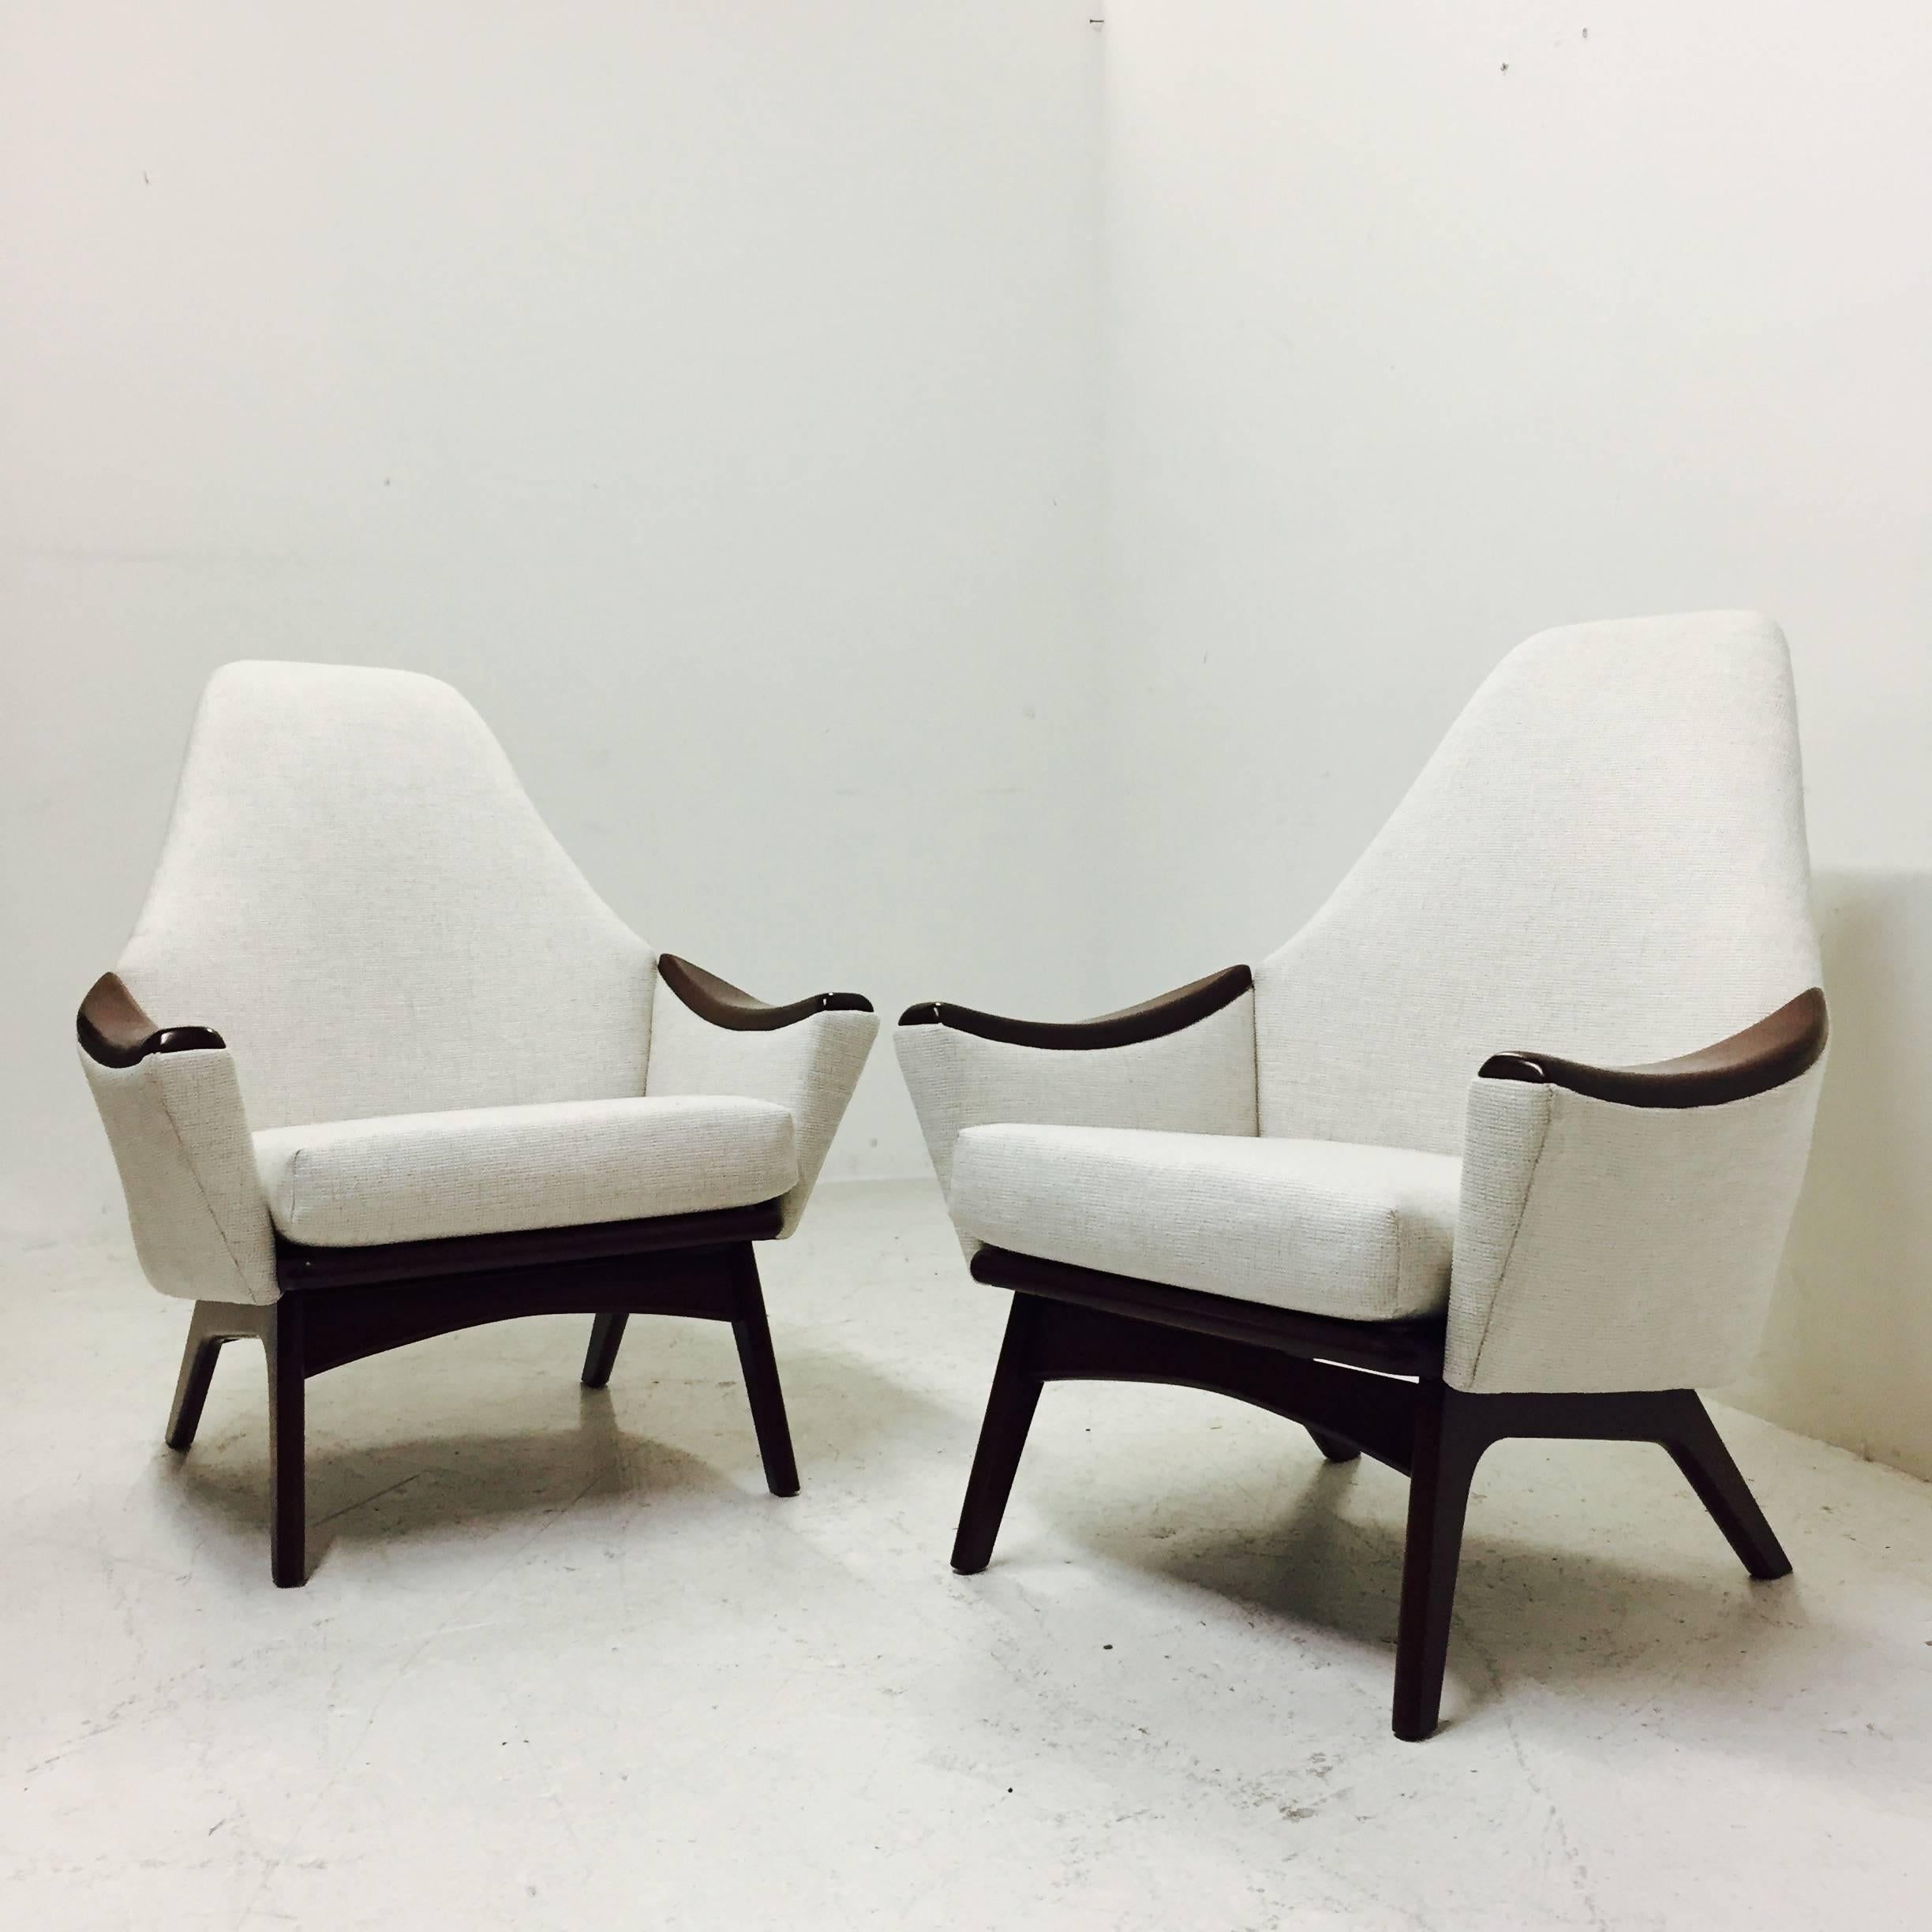 Upholstery Pair of Adrian Pearsall High Back Lounge Chairs for Craft Associates